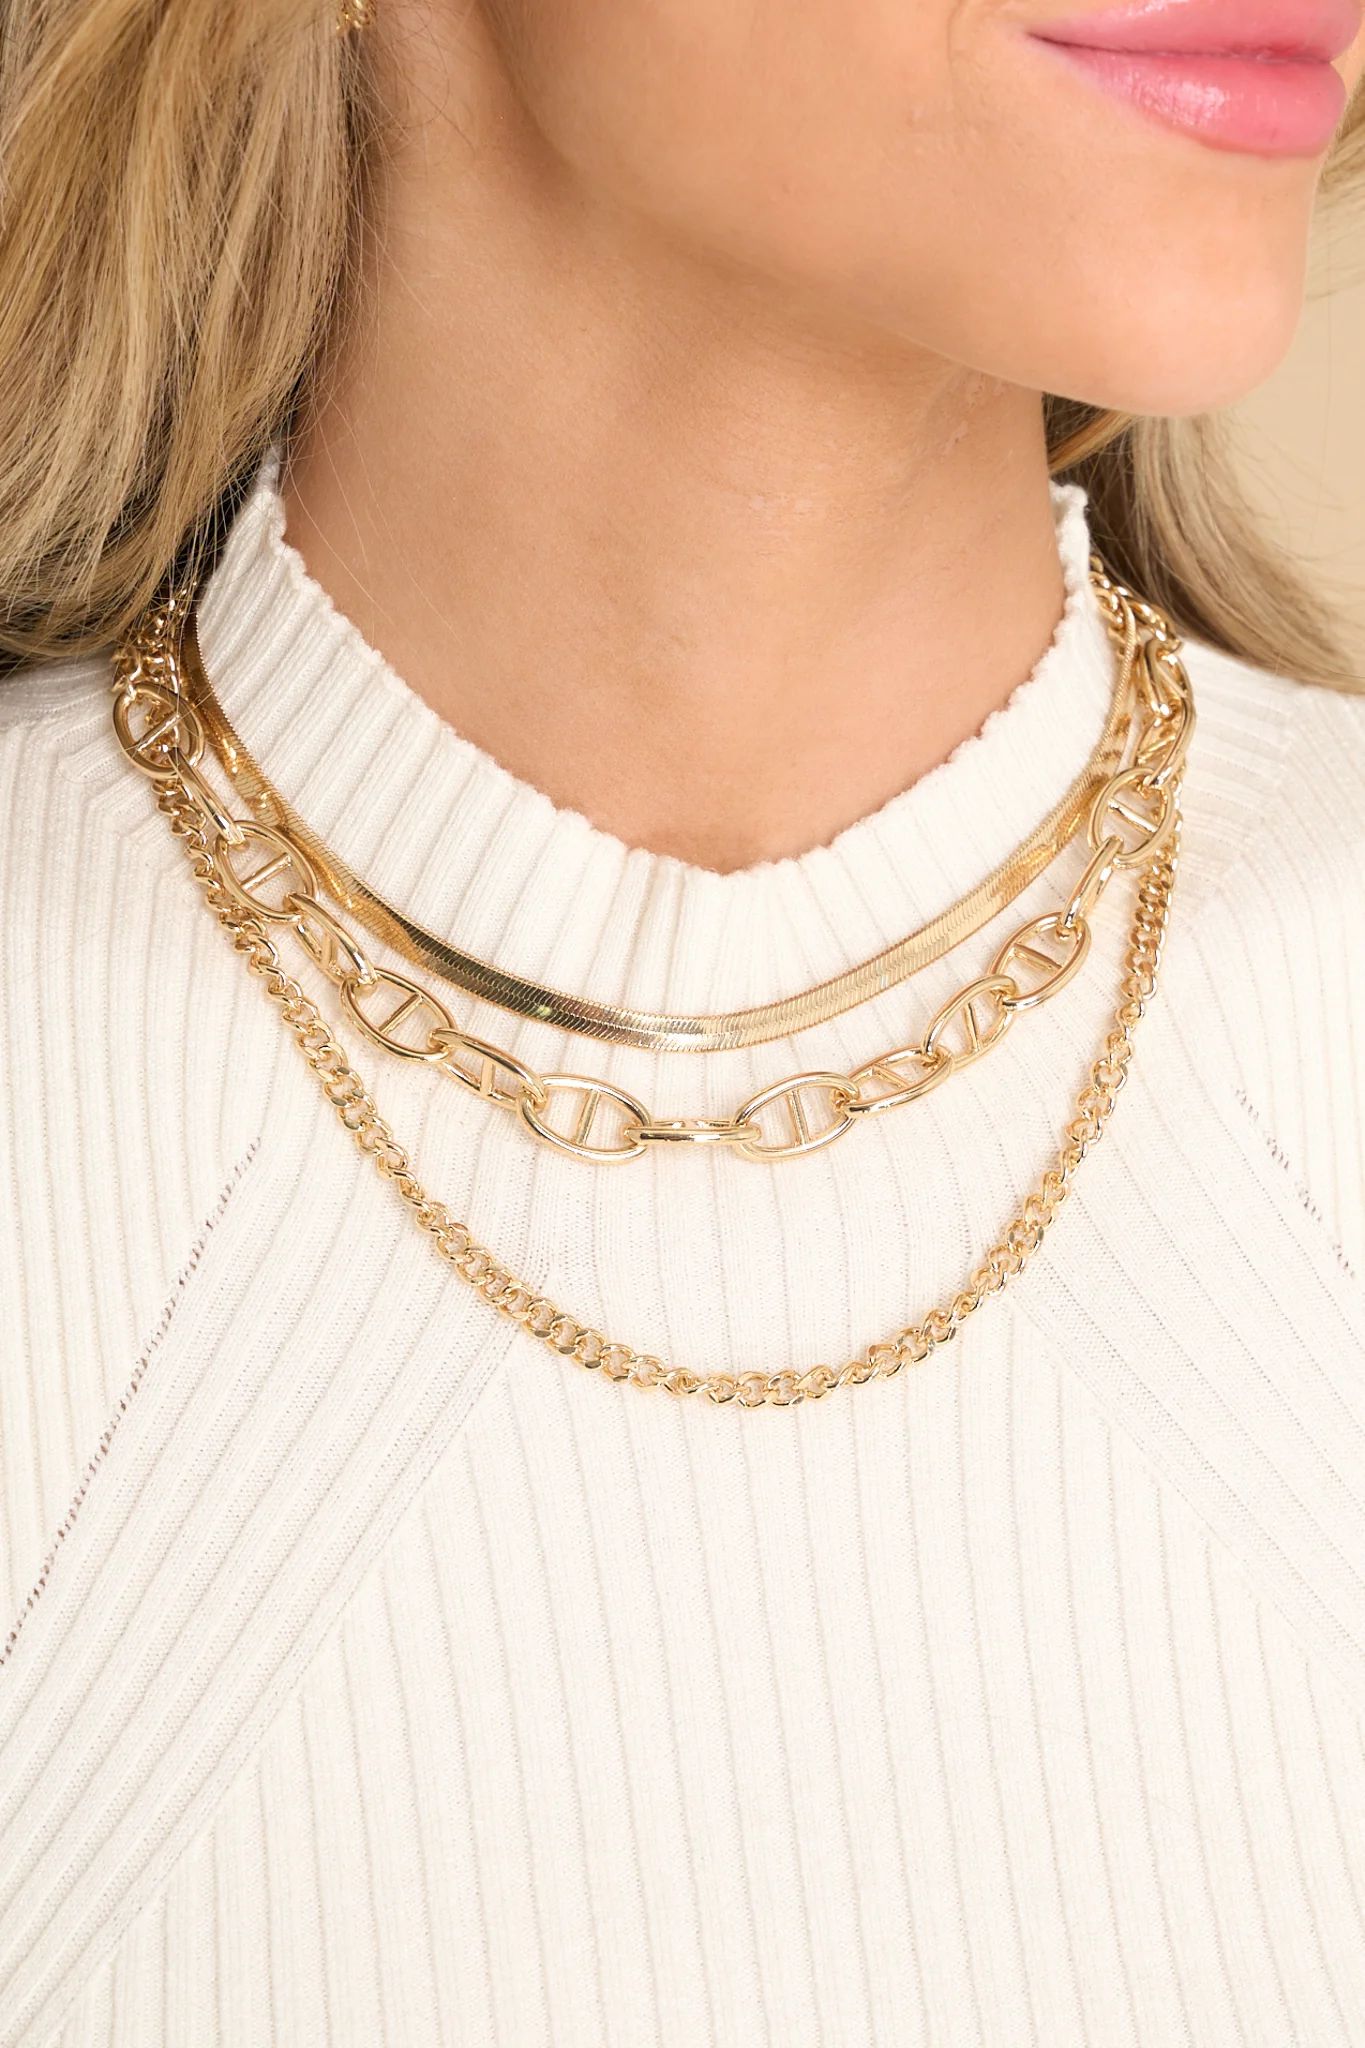 Exceptional Ideas Gold Layered Necklace | Red Dress 